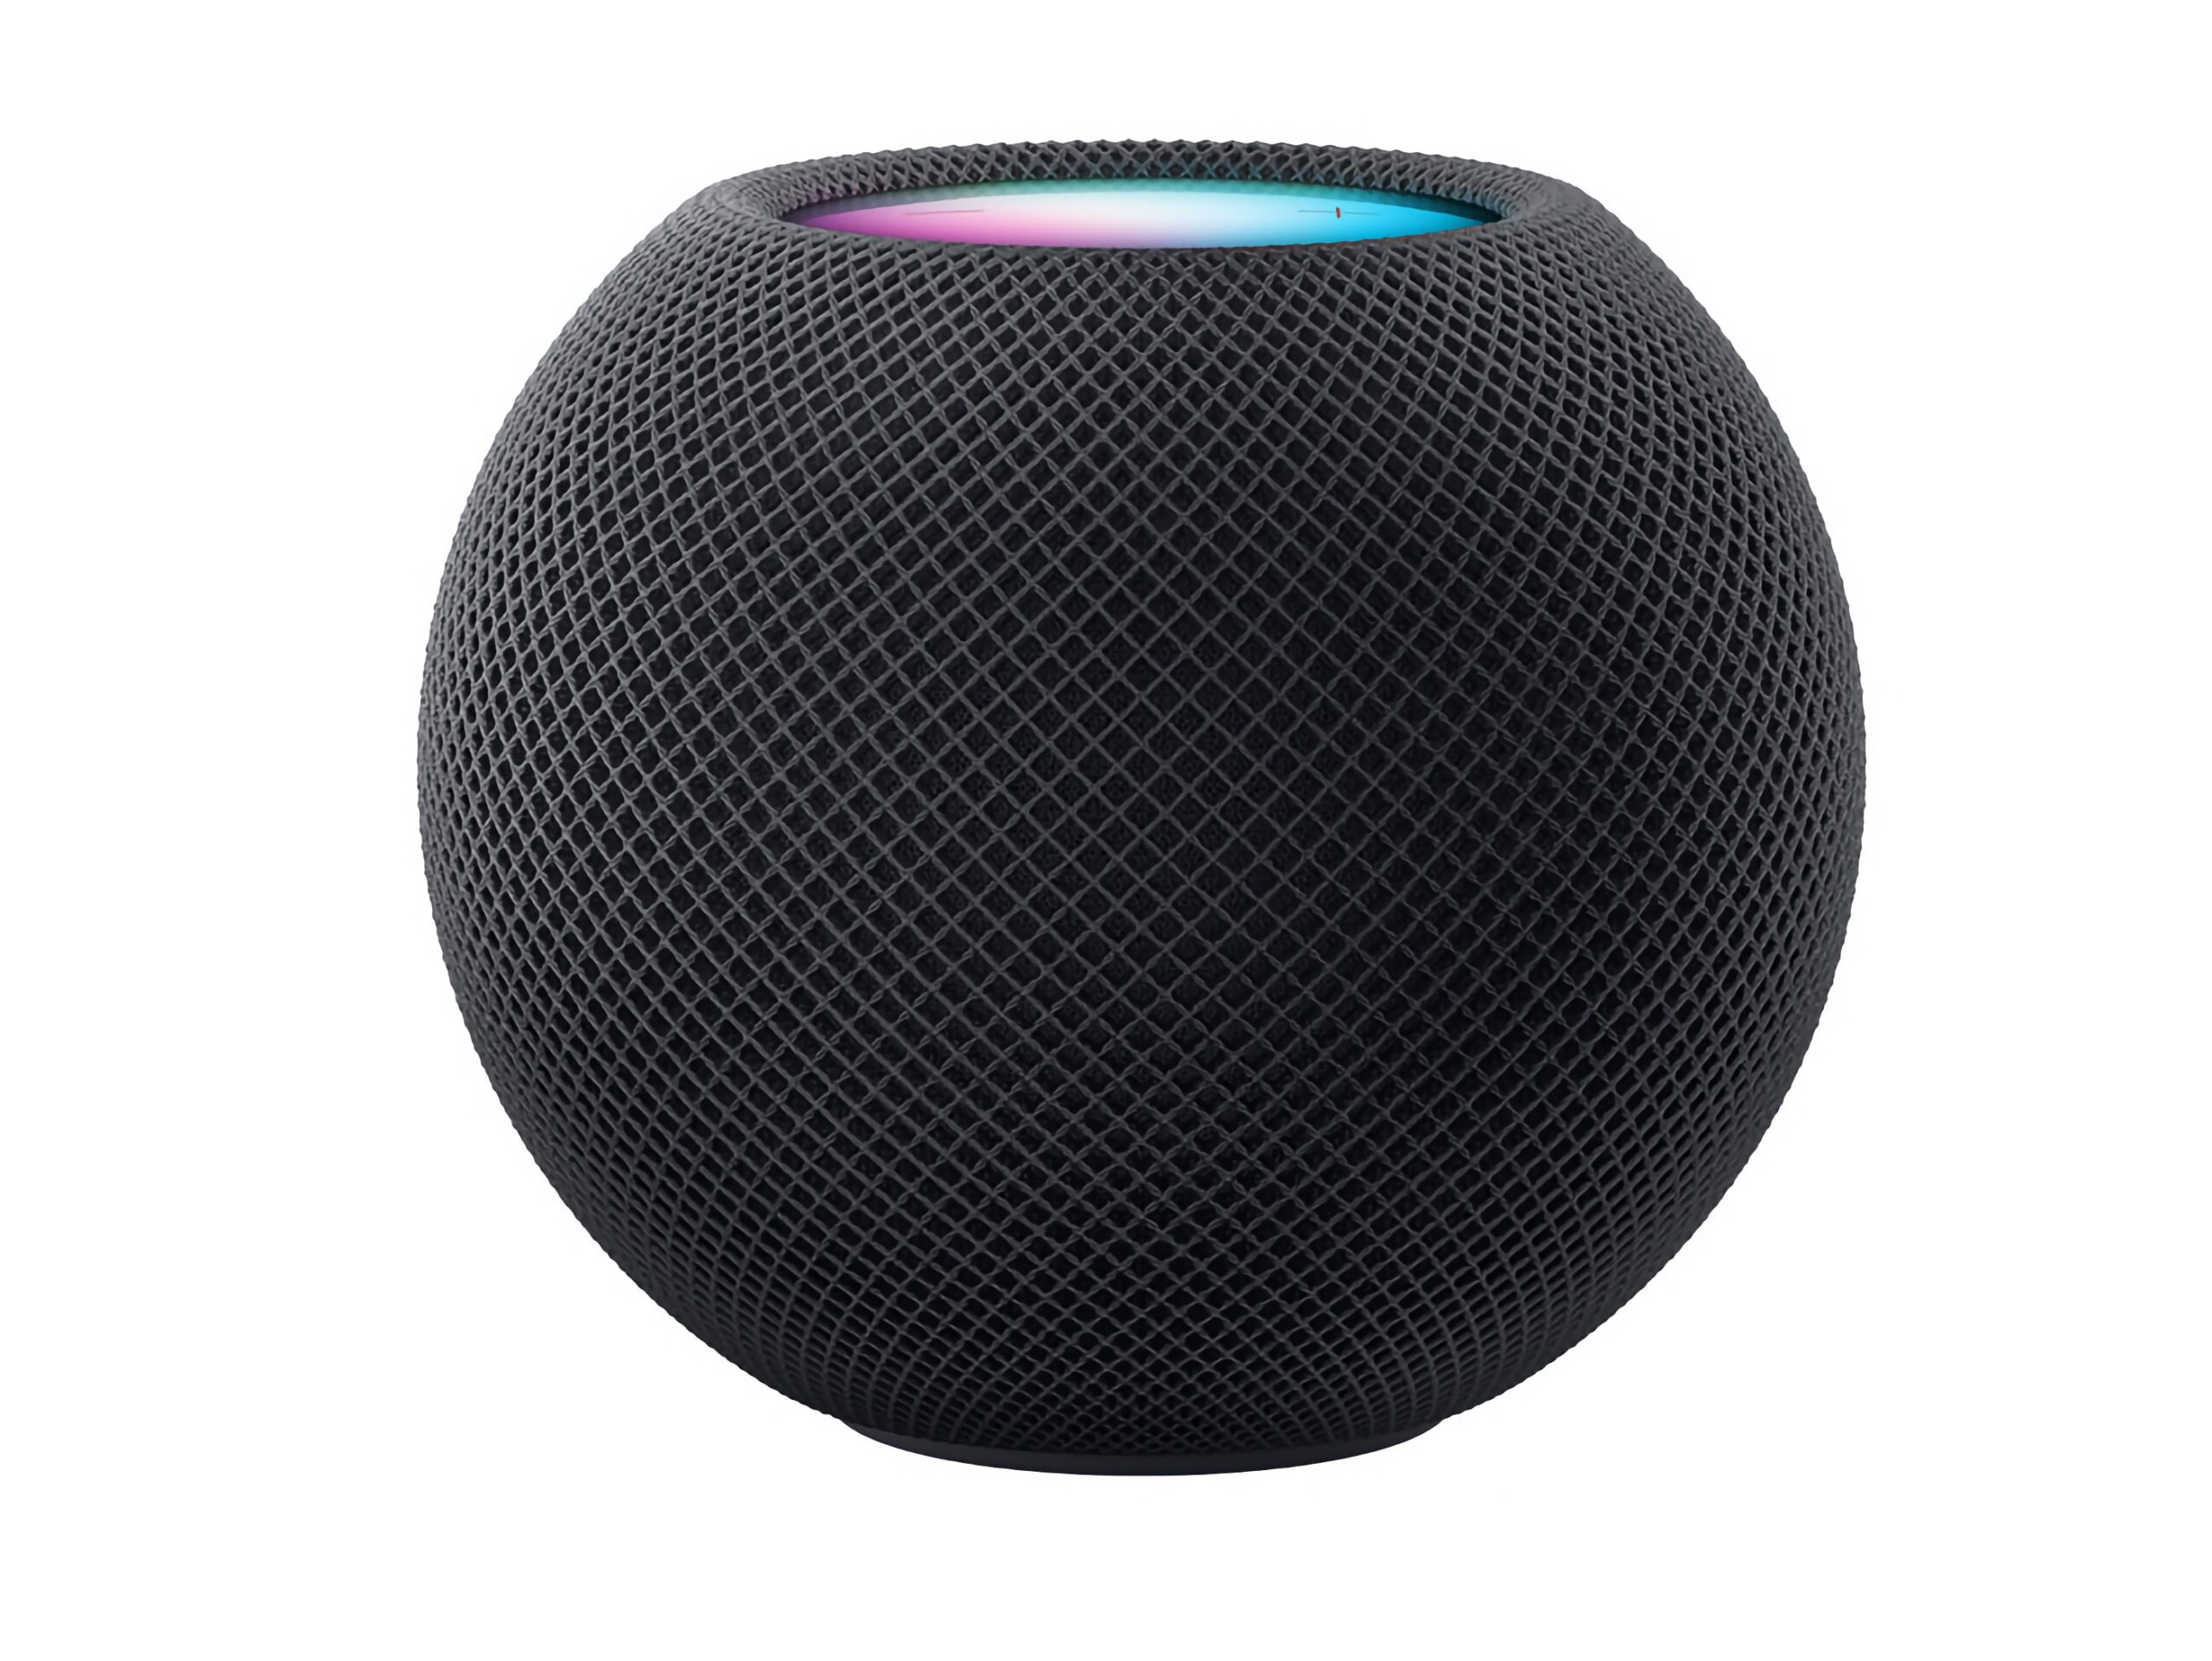 Apple releases new HomePod mini during midnight launch